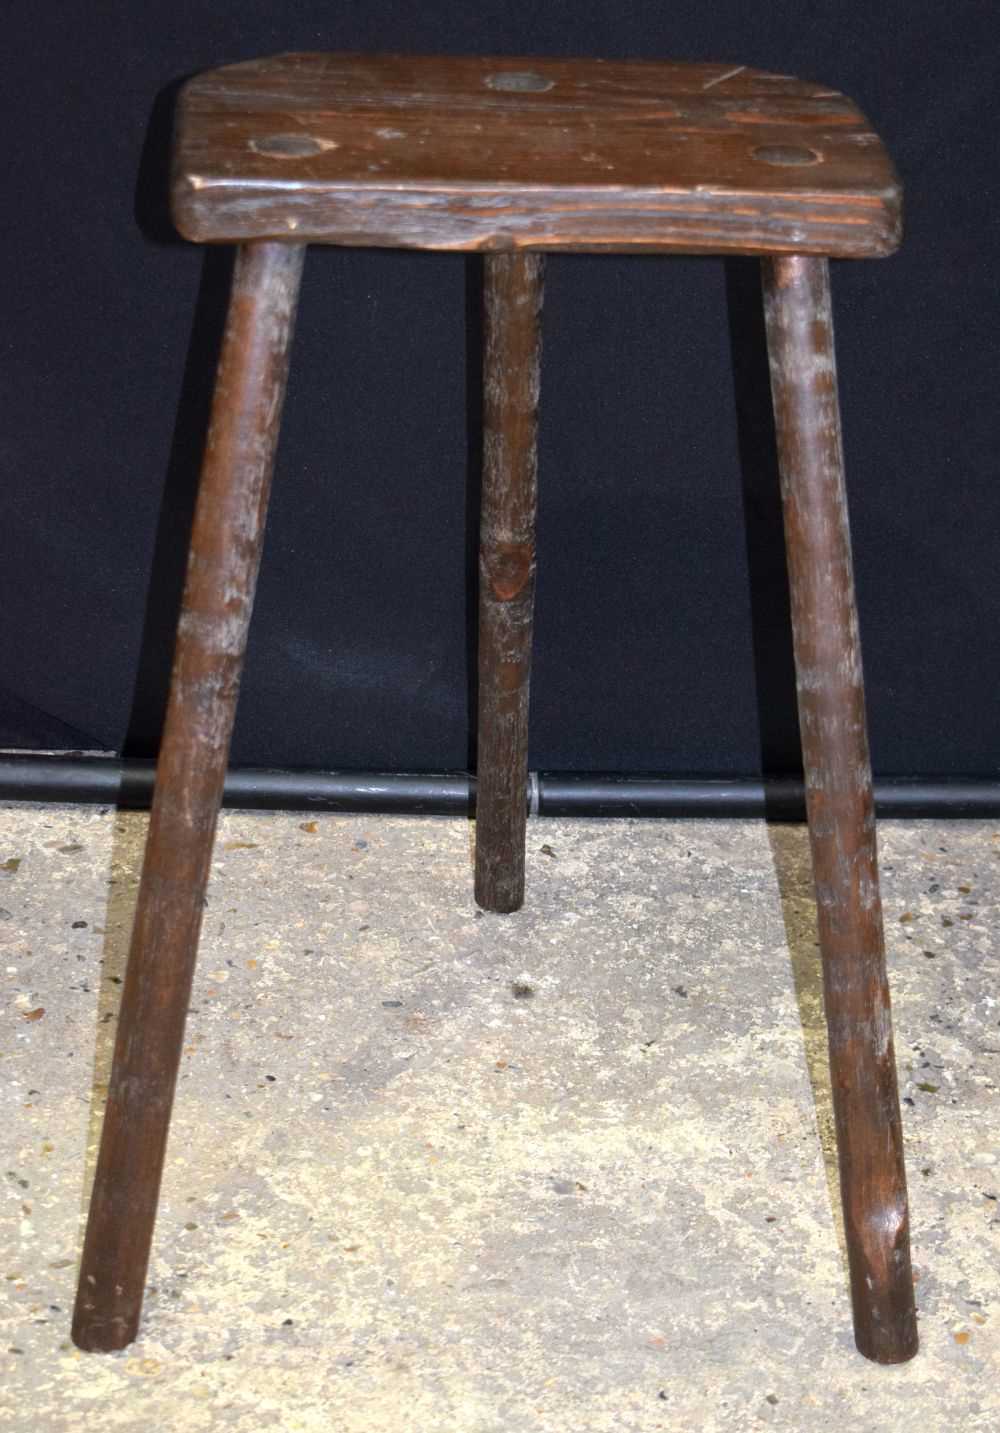 An wooden Cutlers stool 61 zx 36 x 21 cm. - Image 4 of 6